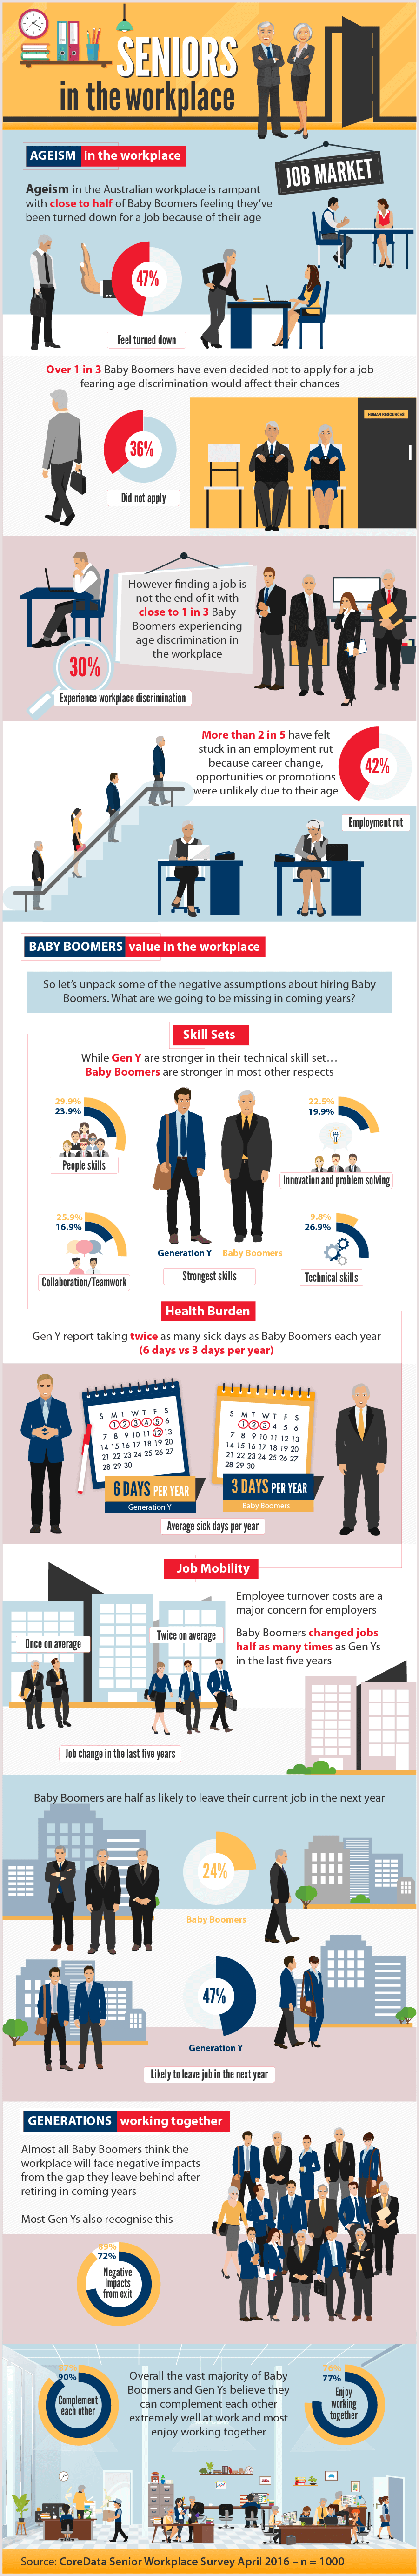 The Australian Seniors Series: Seniors in the Workplace (infographic)